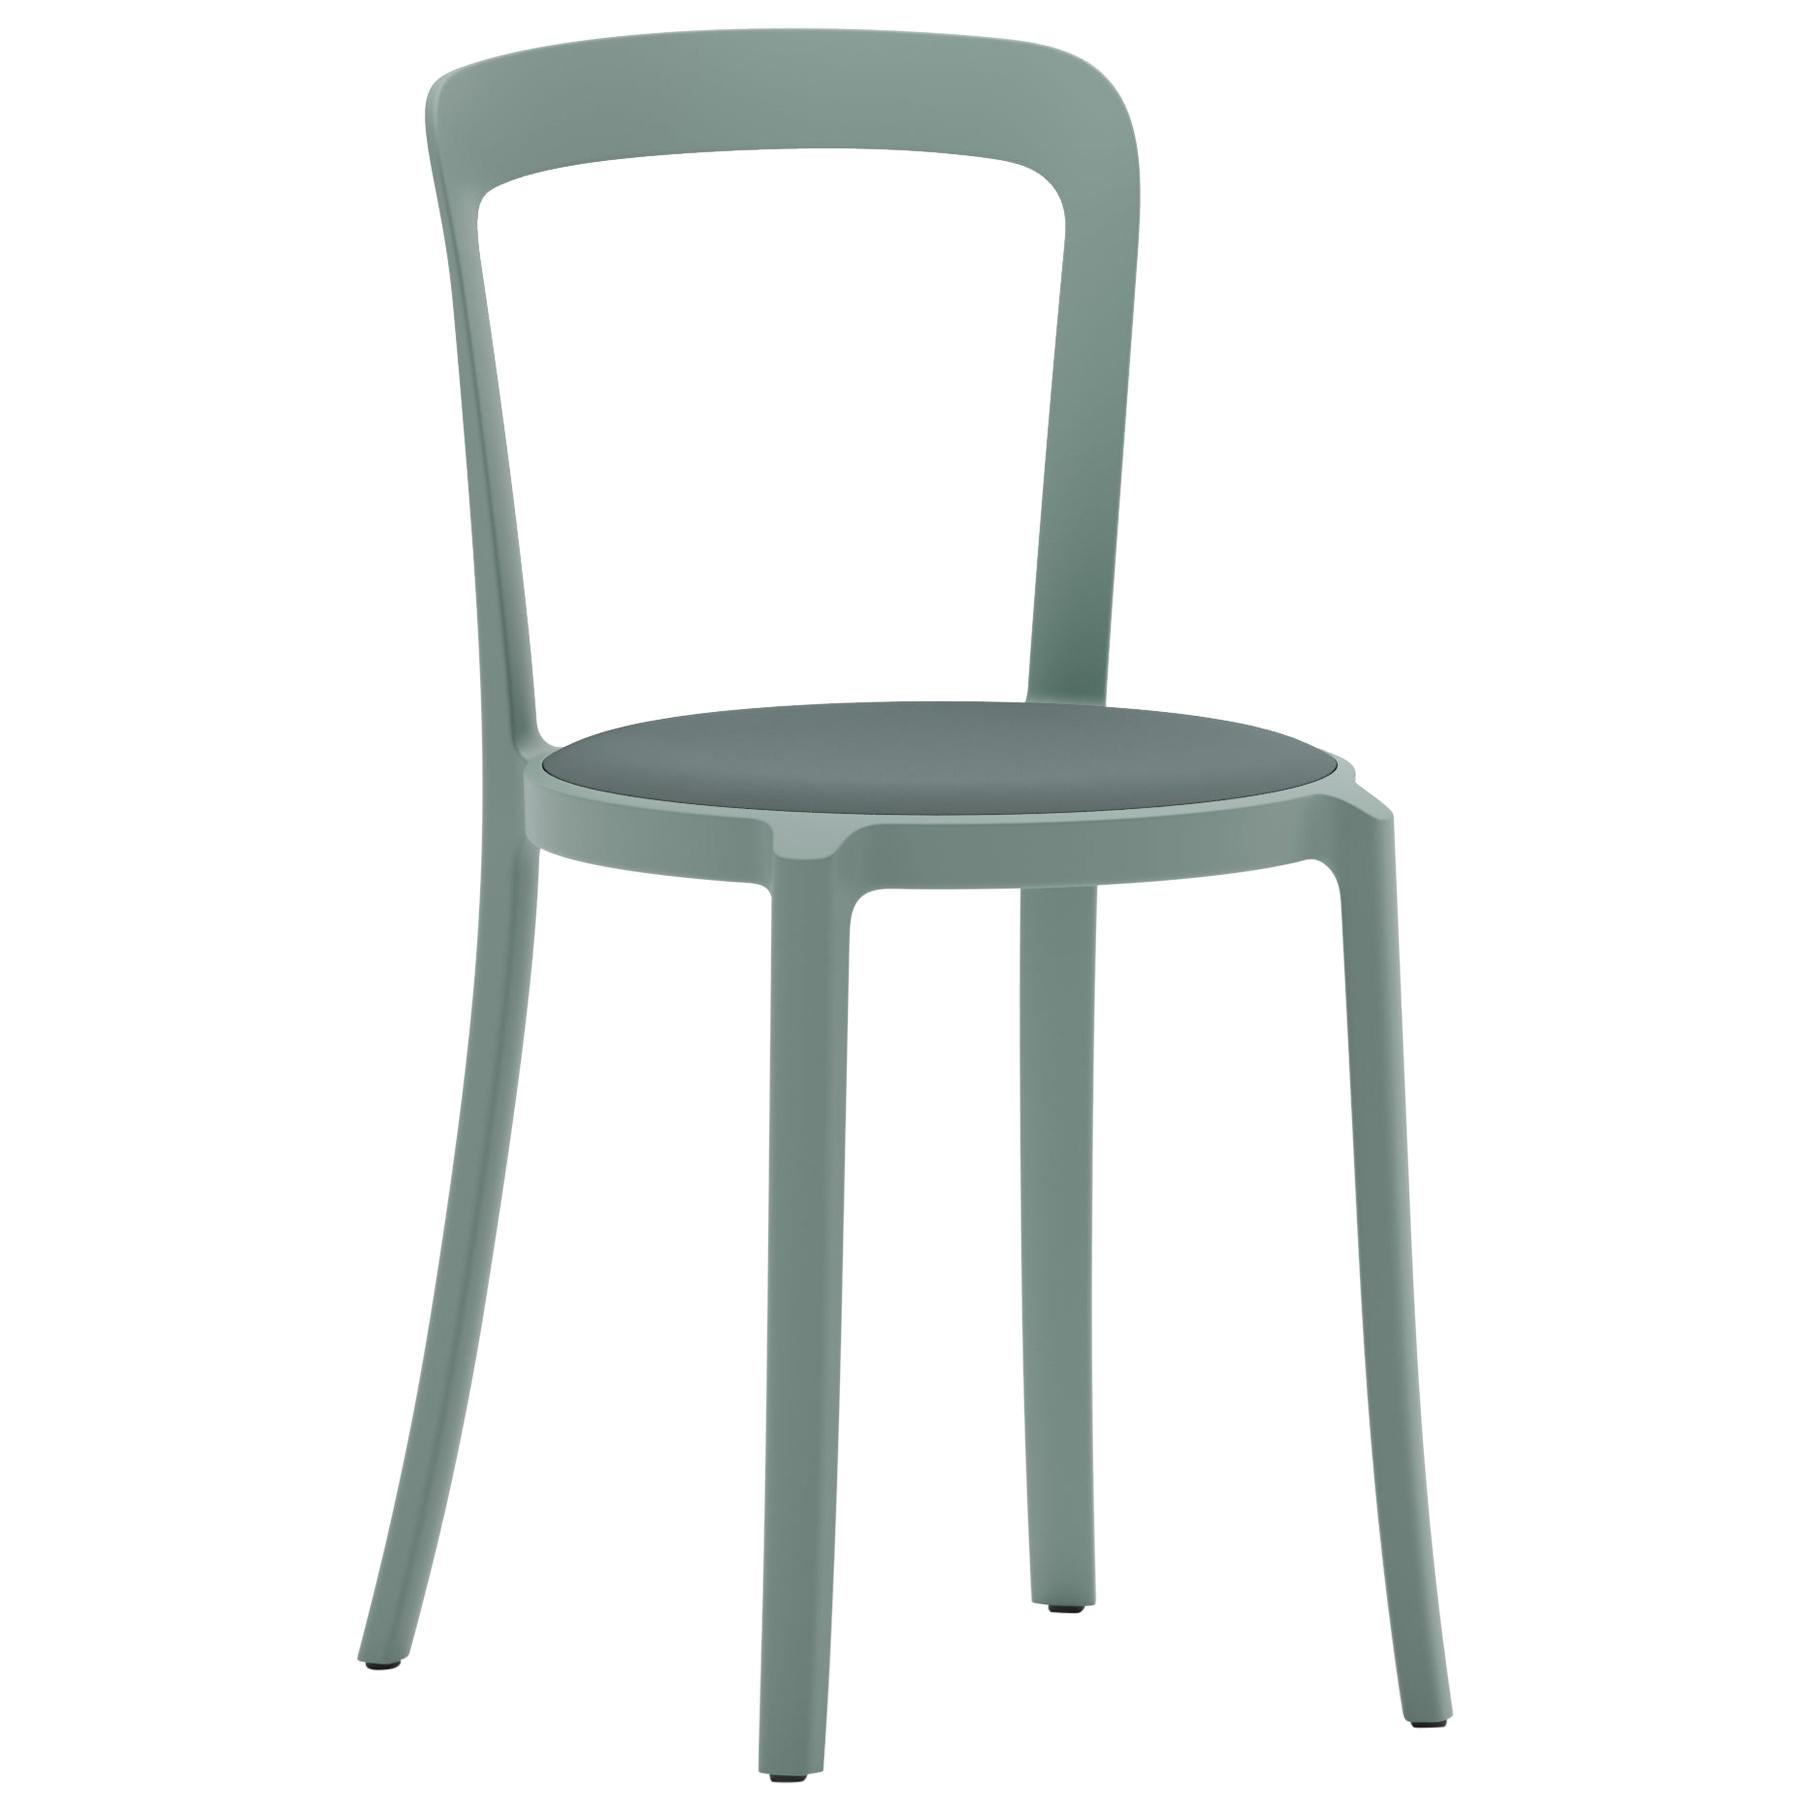 On & On Stacking Chair in Plastic with Light Blue Fabric 1 by Barber & Osgerby